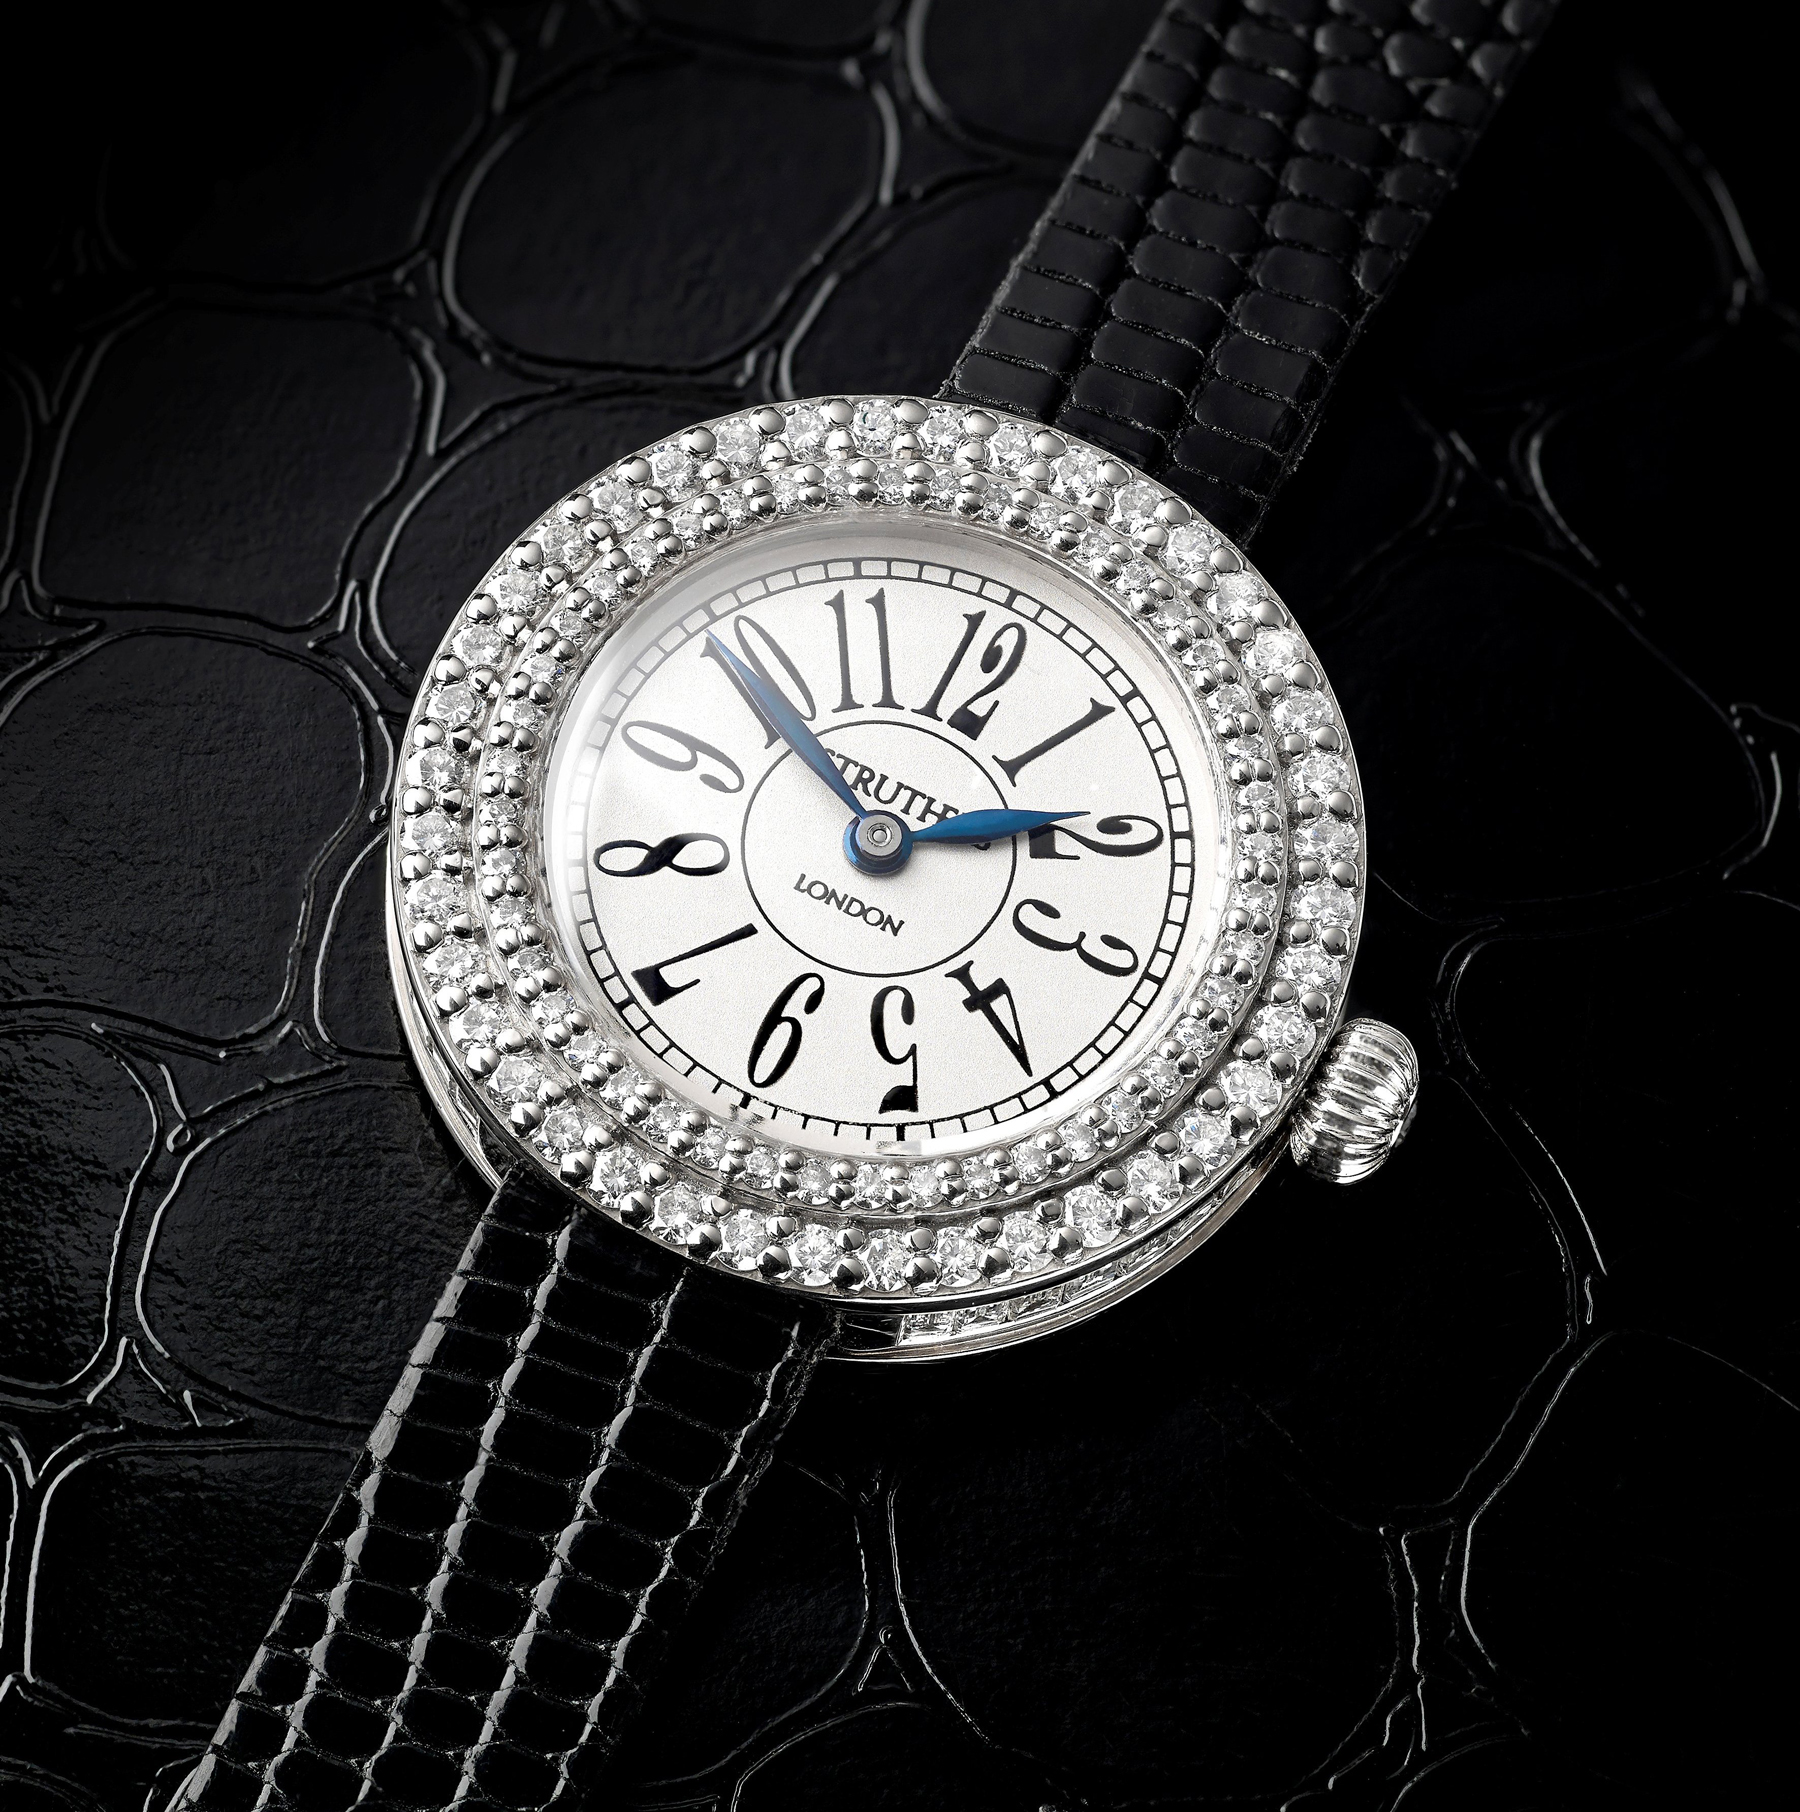 Struthers diamond watch front.